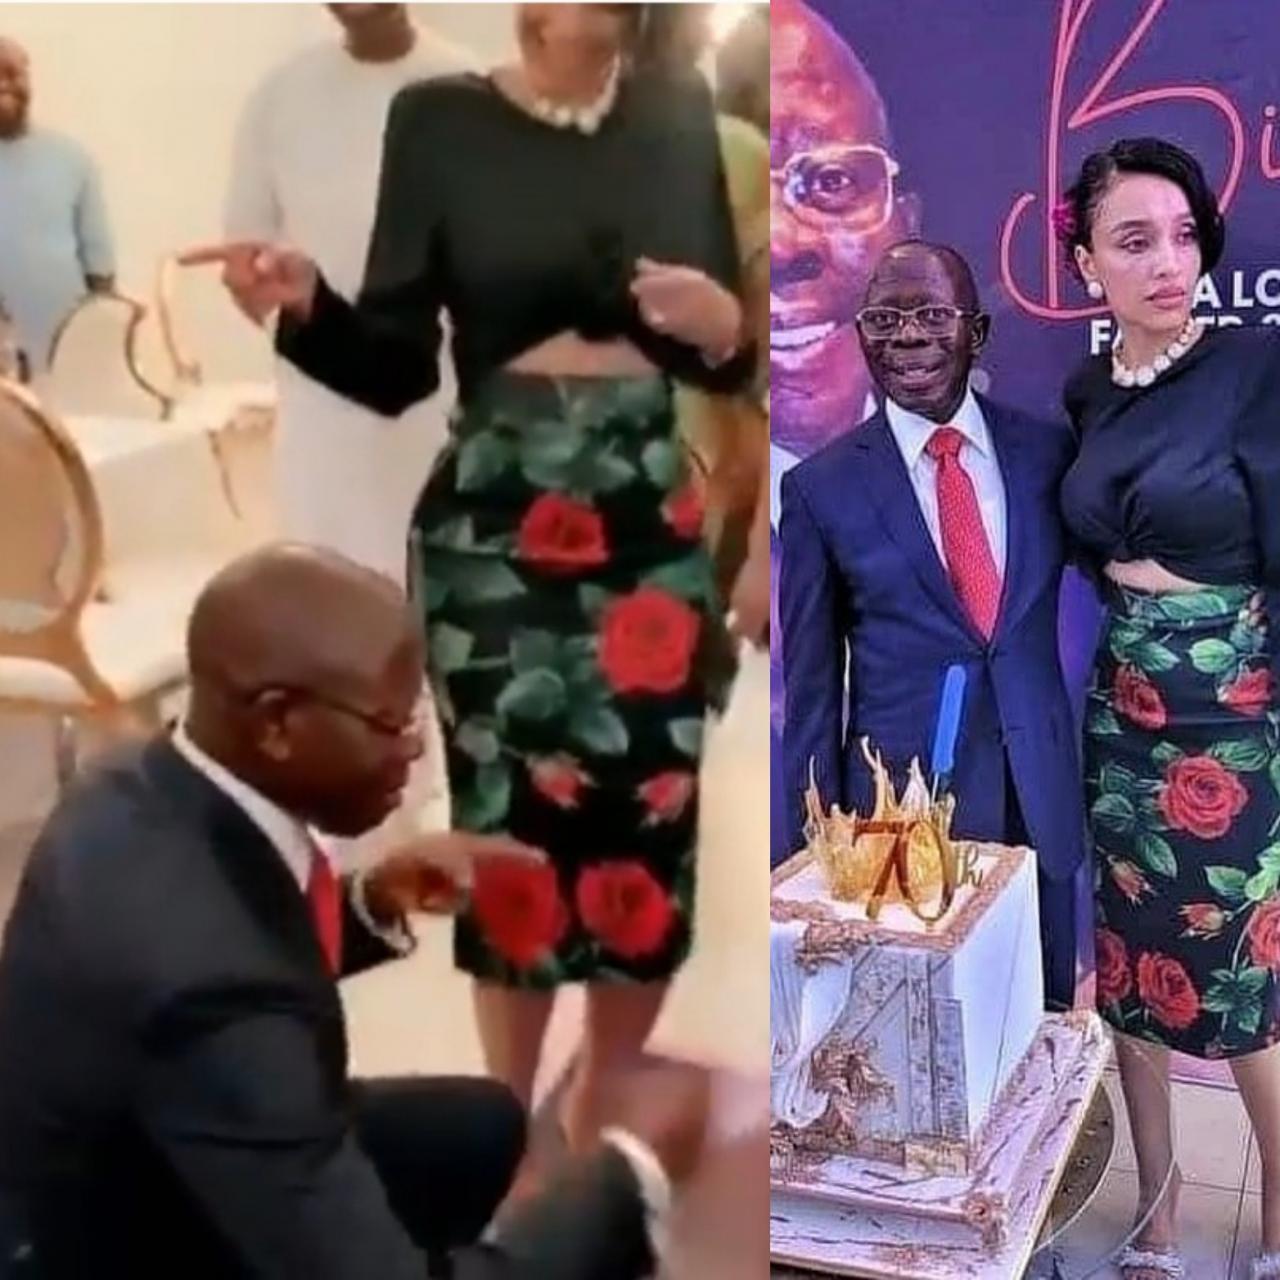 Adams Oshiomhole shows off his dancing skills as he rocks with wife Lara at his 70th birthday celebration (photos/video)